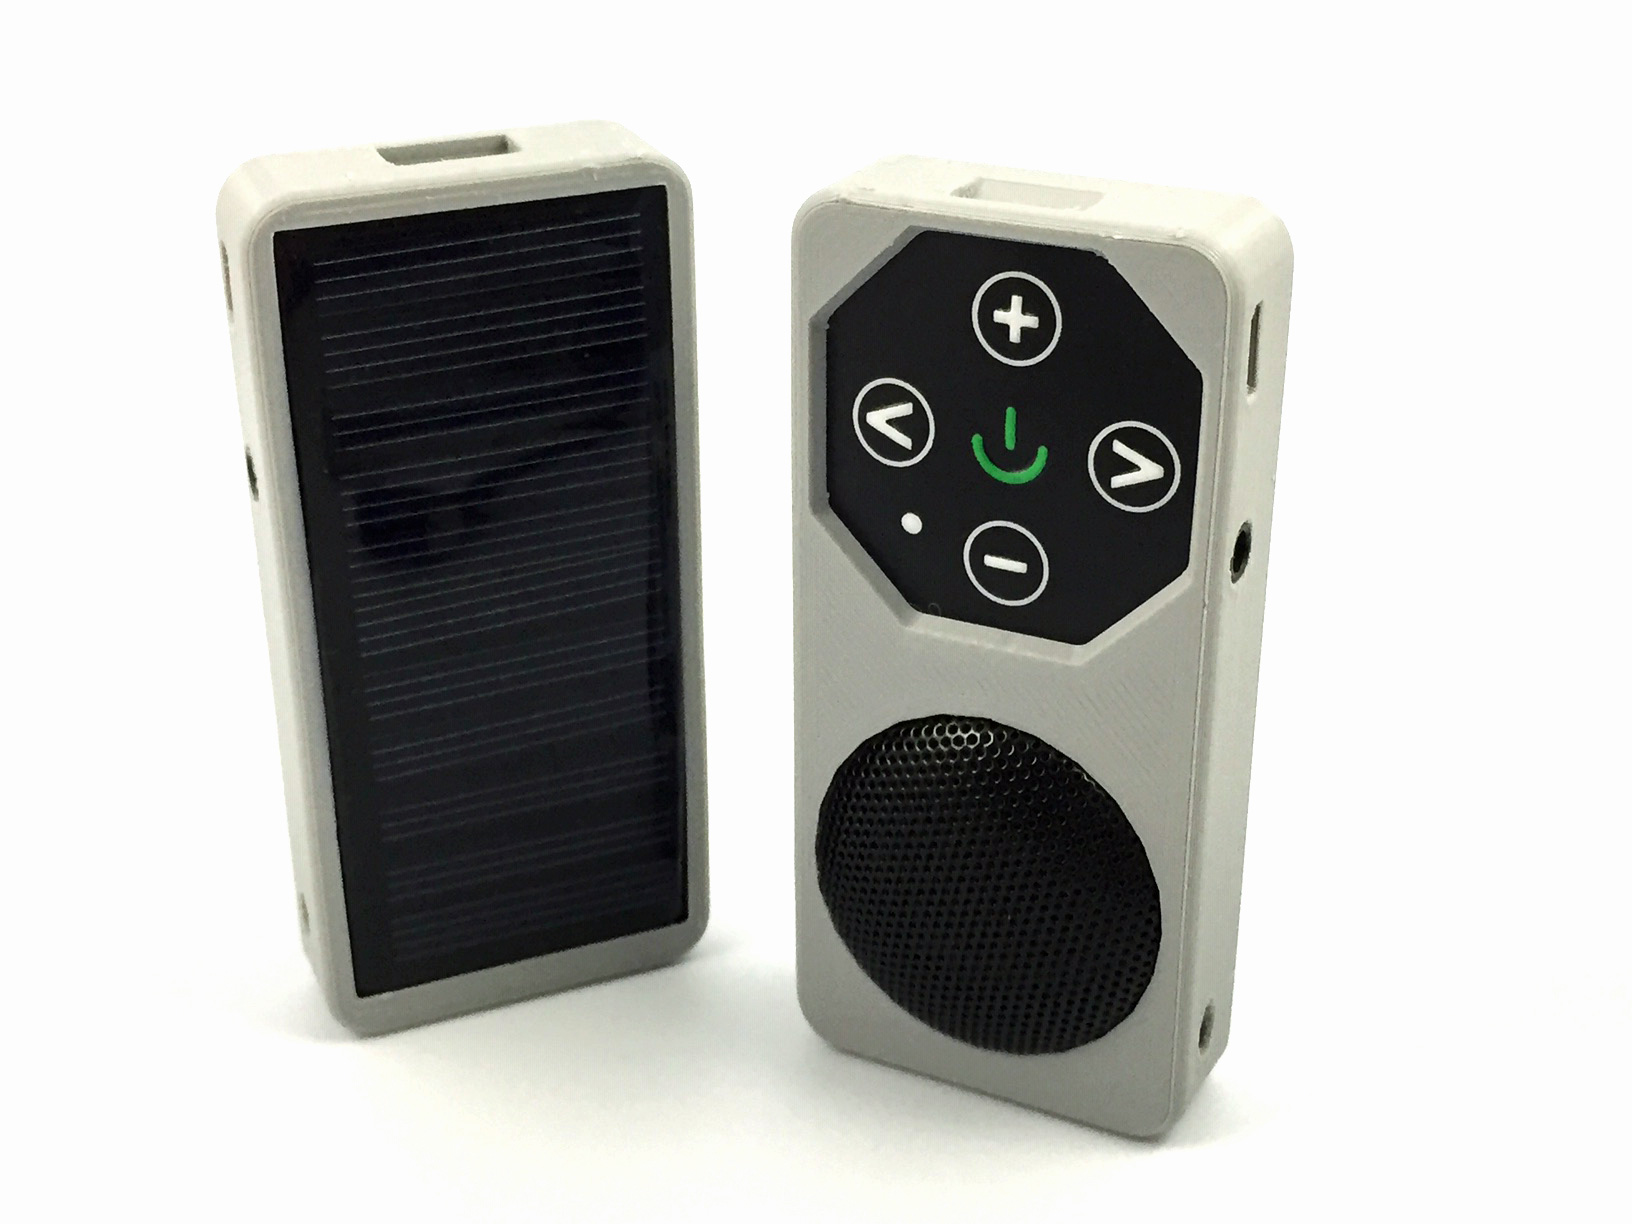 SeedPlayer solar player, front and back with solar panel